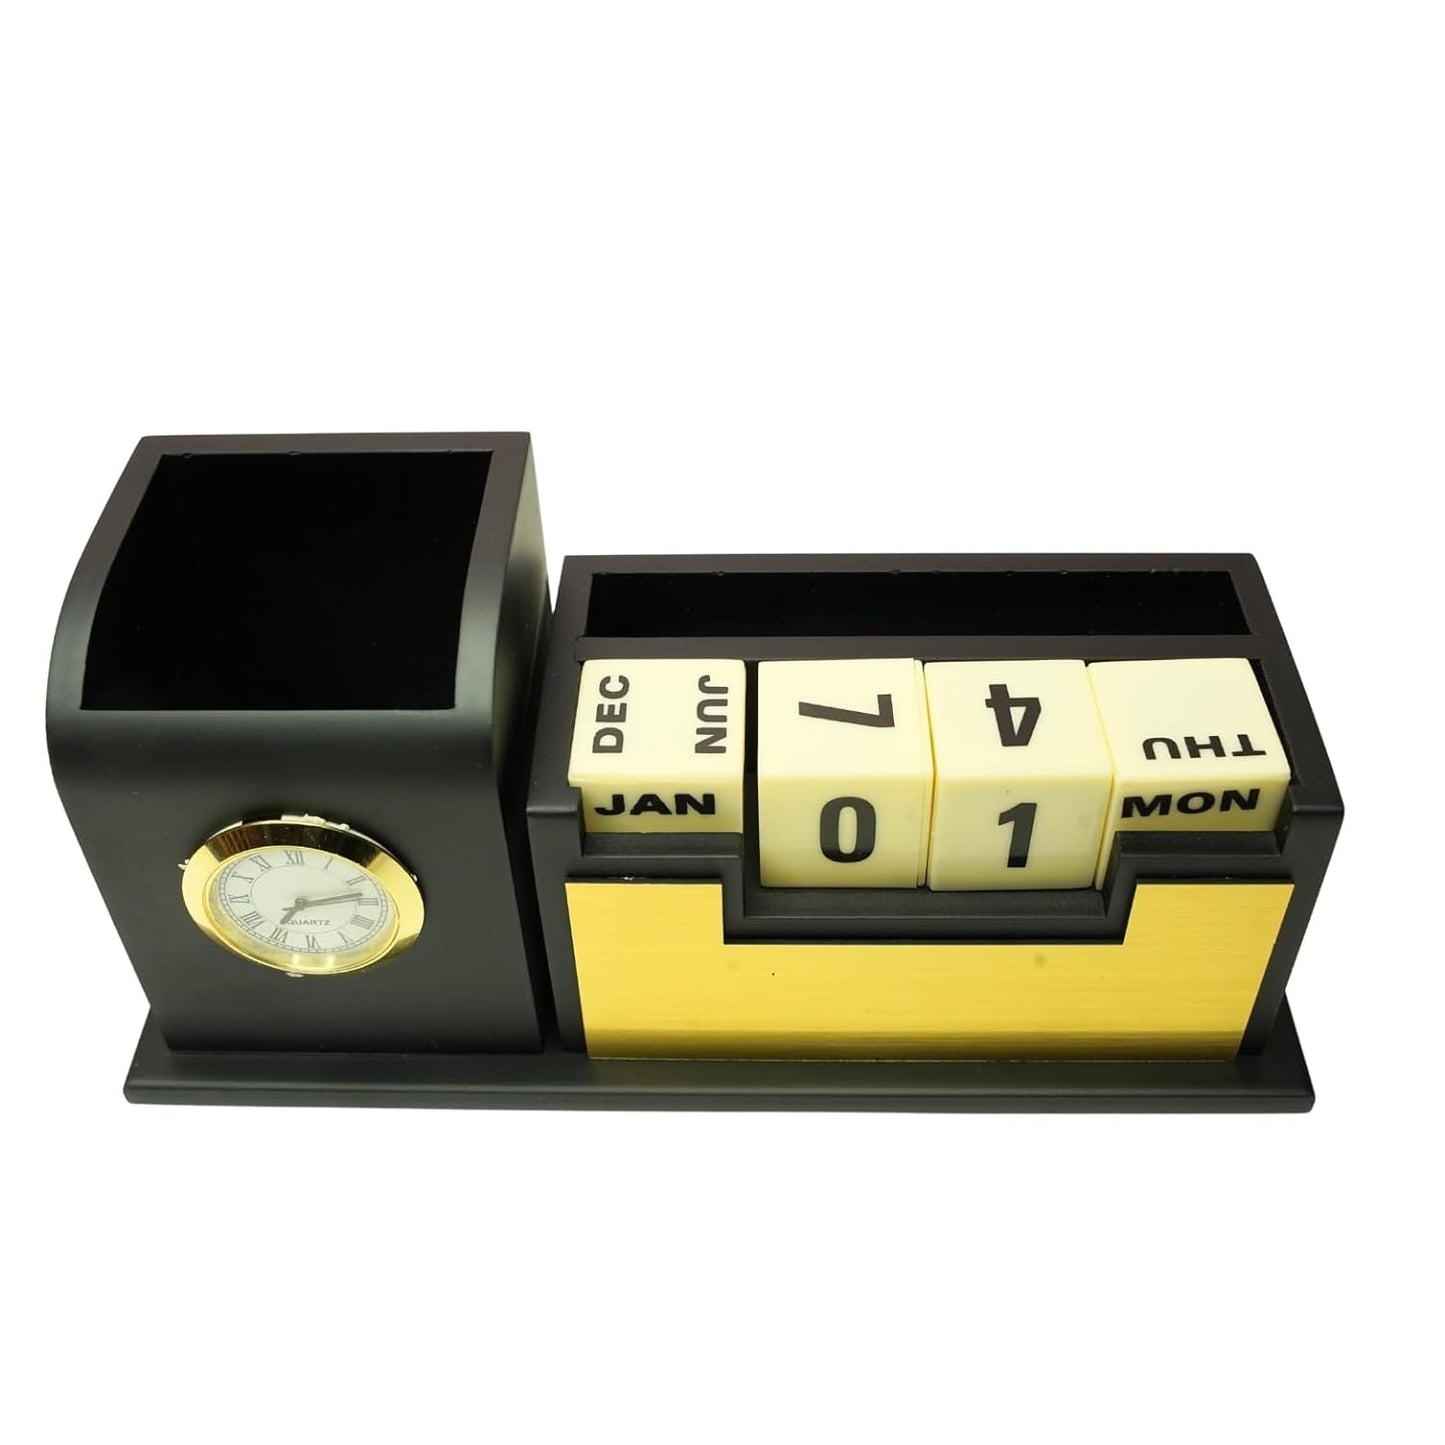 Craft Closet & Gifts - Personalized Classic Matte Black Pencil Pen Holder Stand with Clock, Rolling Calendar & Mobile Stand For IAS, Advocates, Office & Corporate Gifts (Customized)